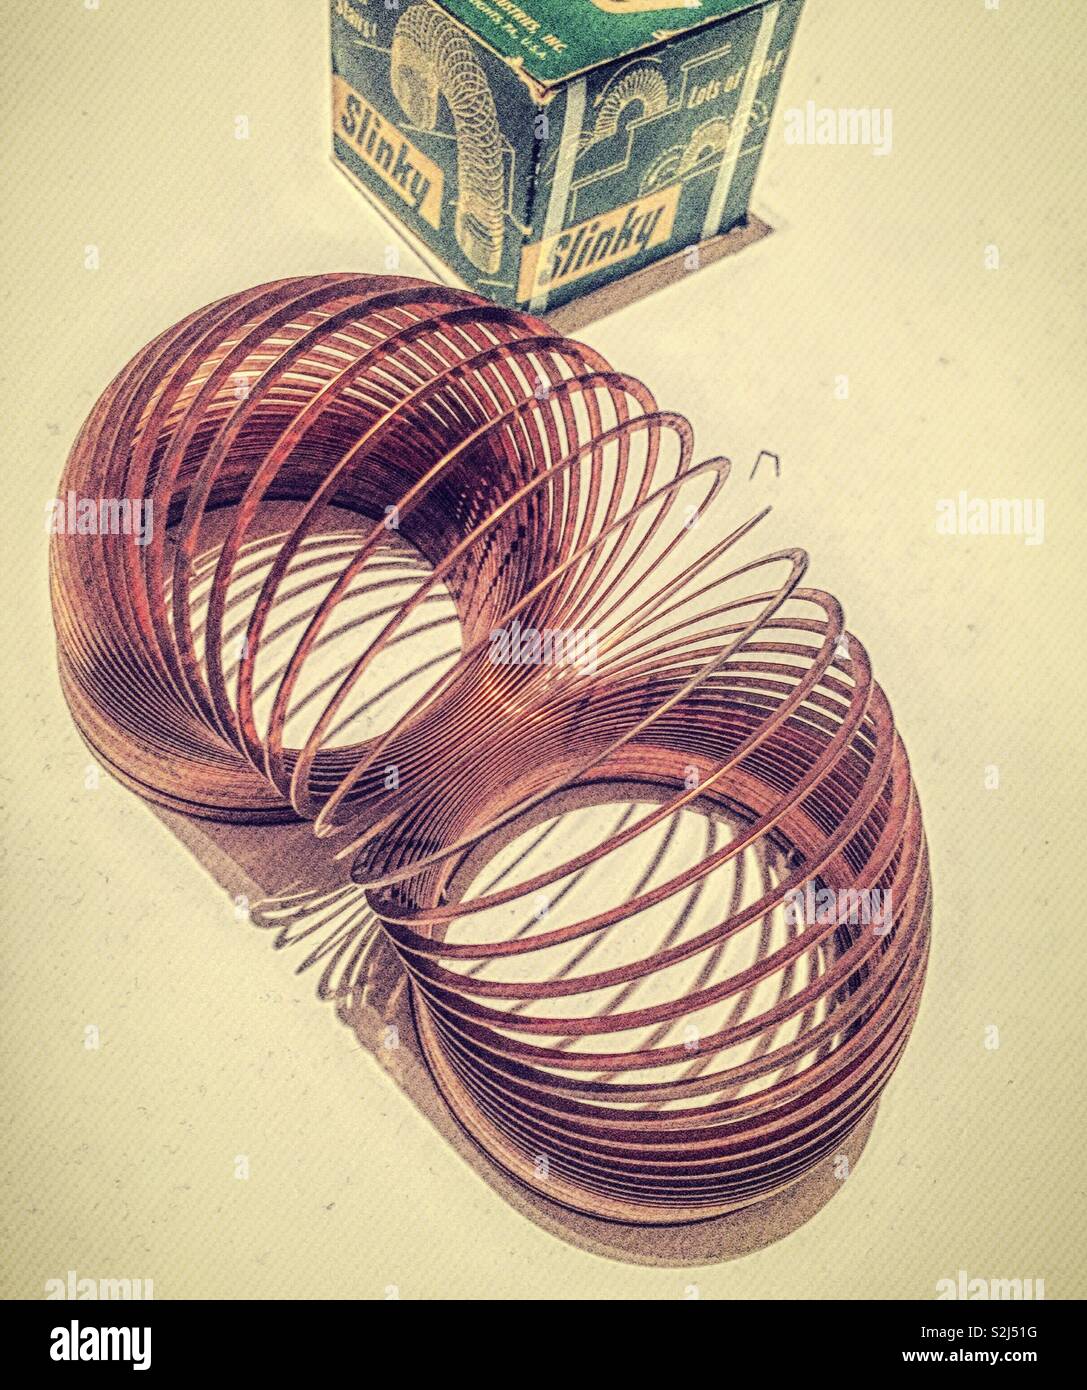 Slinky toy next to its original package from the 1950s, USA Stock Photo